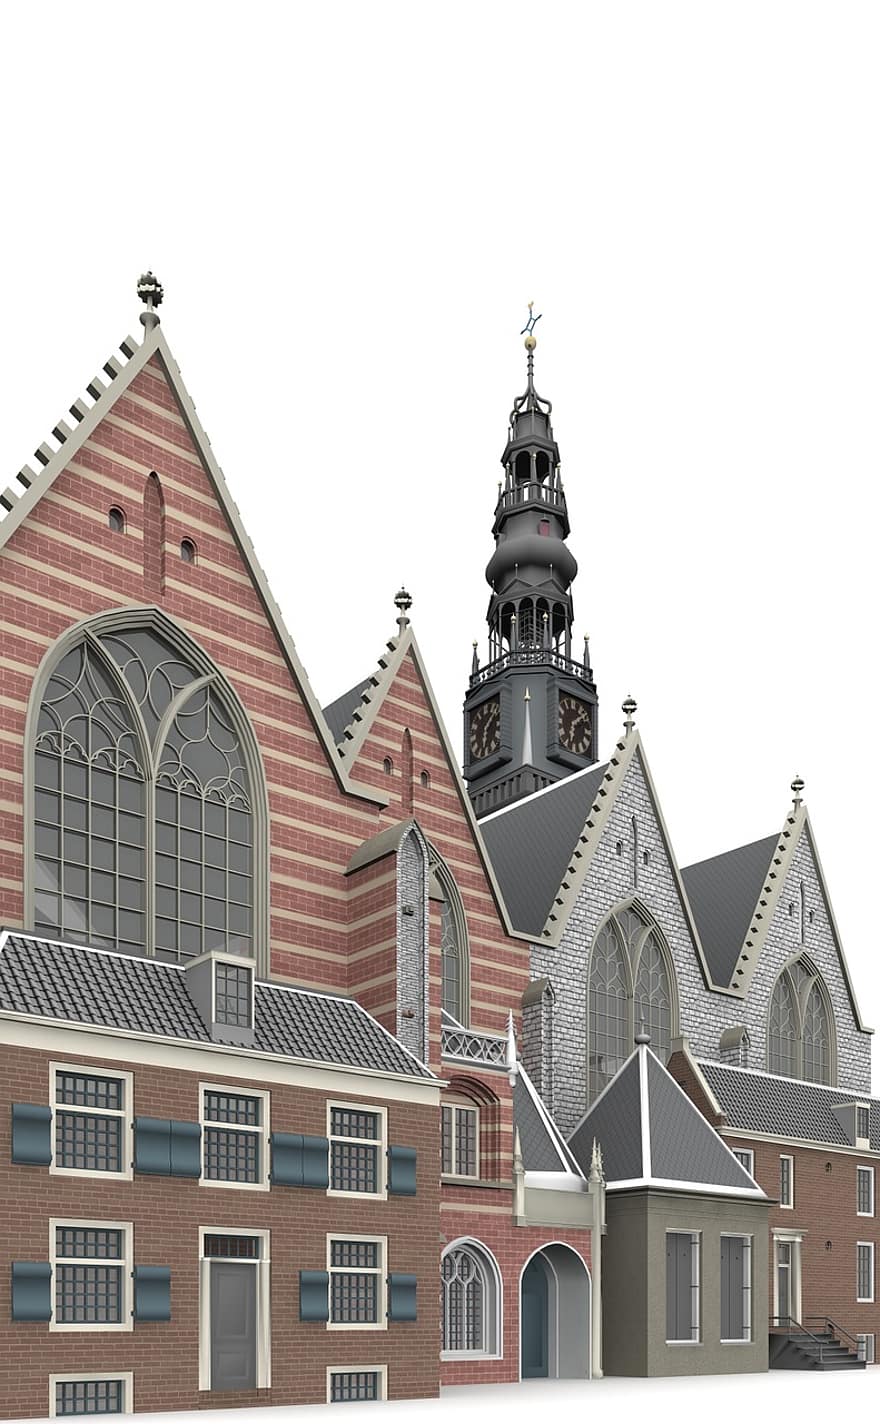 Oude, Kerk, Amsterdam, Architecture, Building, Church, Places Of Interest, Historically, Tourists, Attraction, Landmark